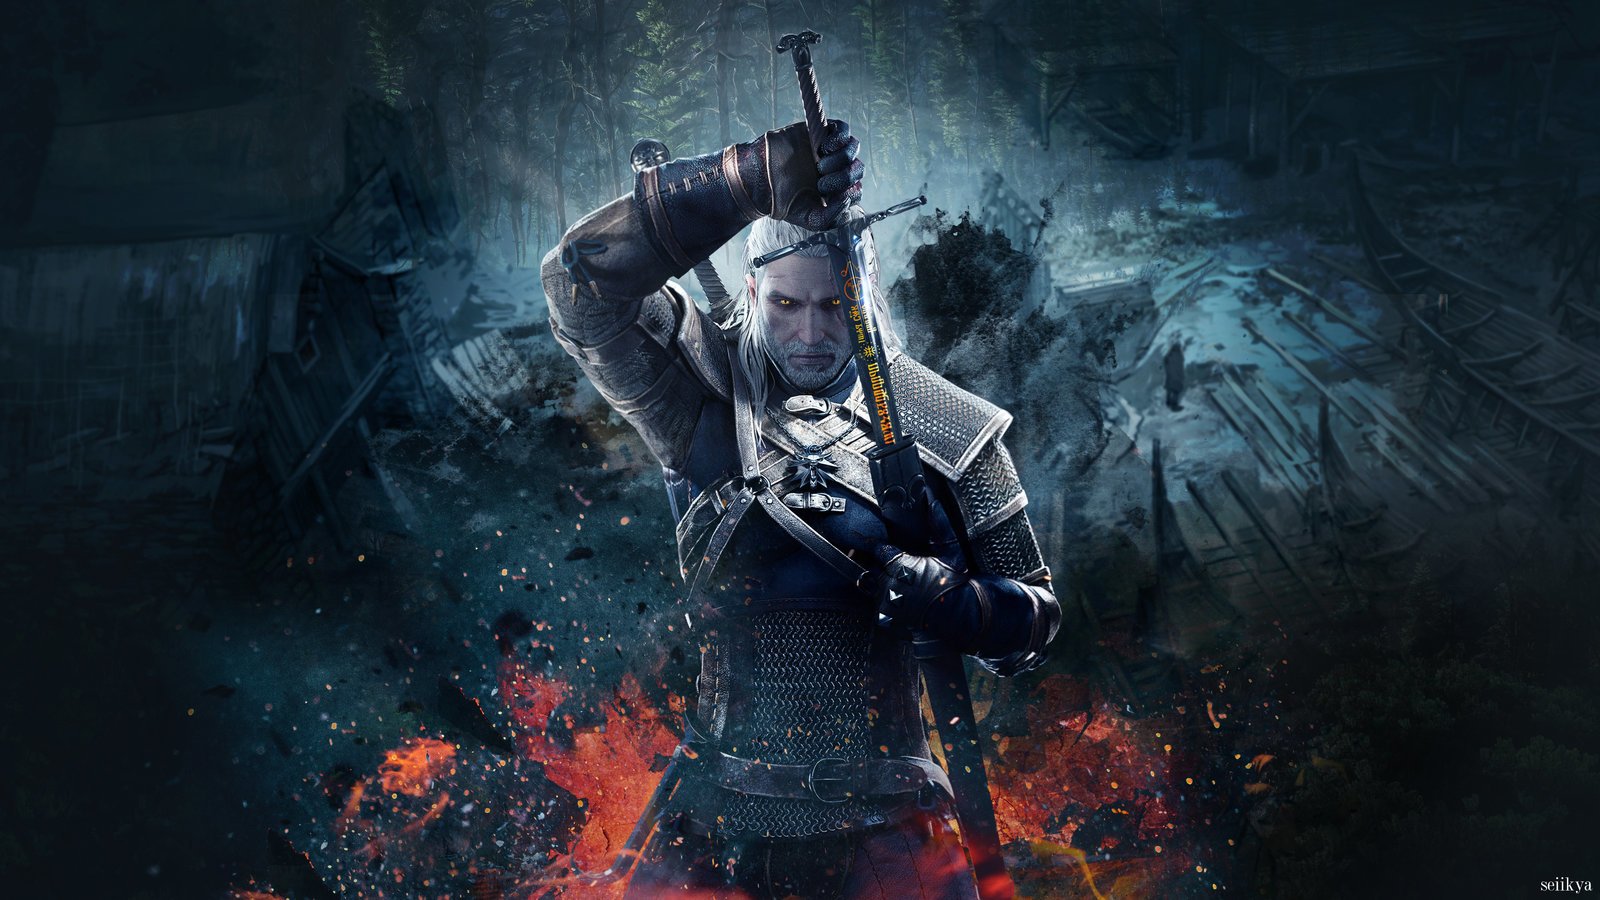 The Witcher 3, Netflix reveals the release date: the episodes will be divided into two parts